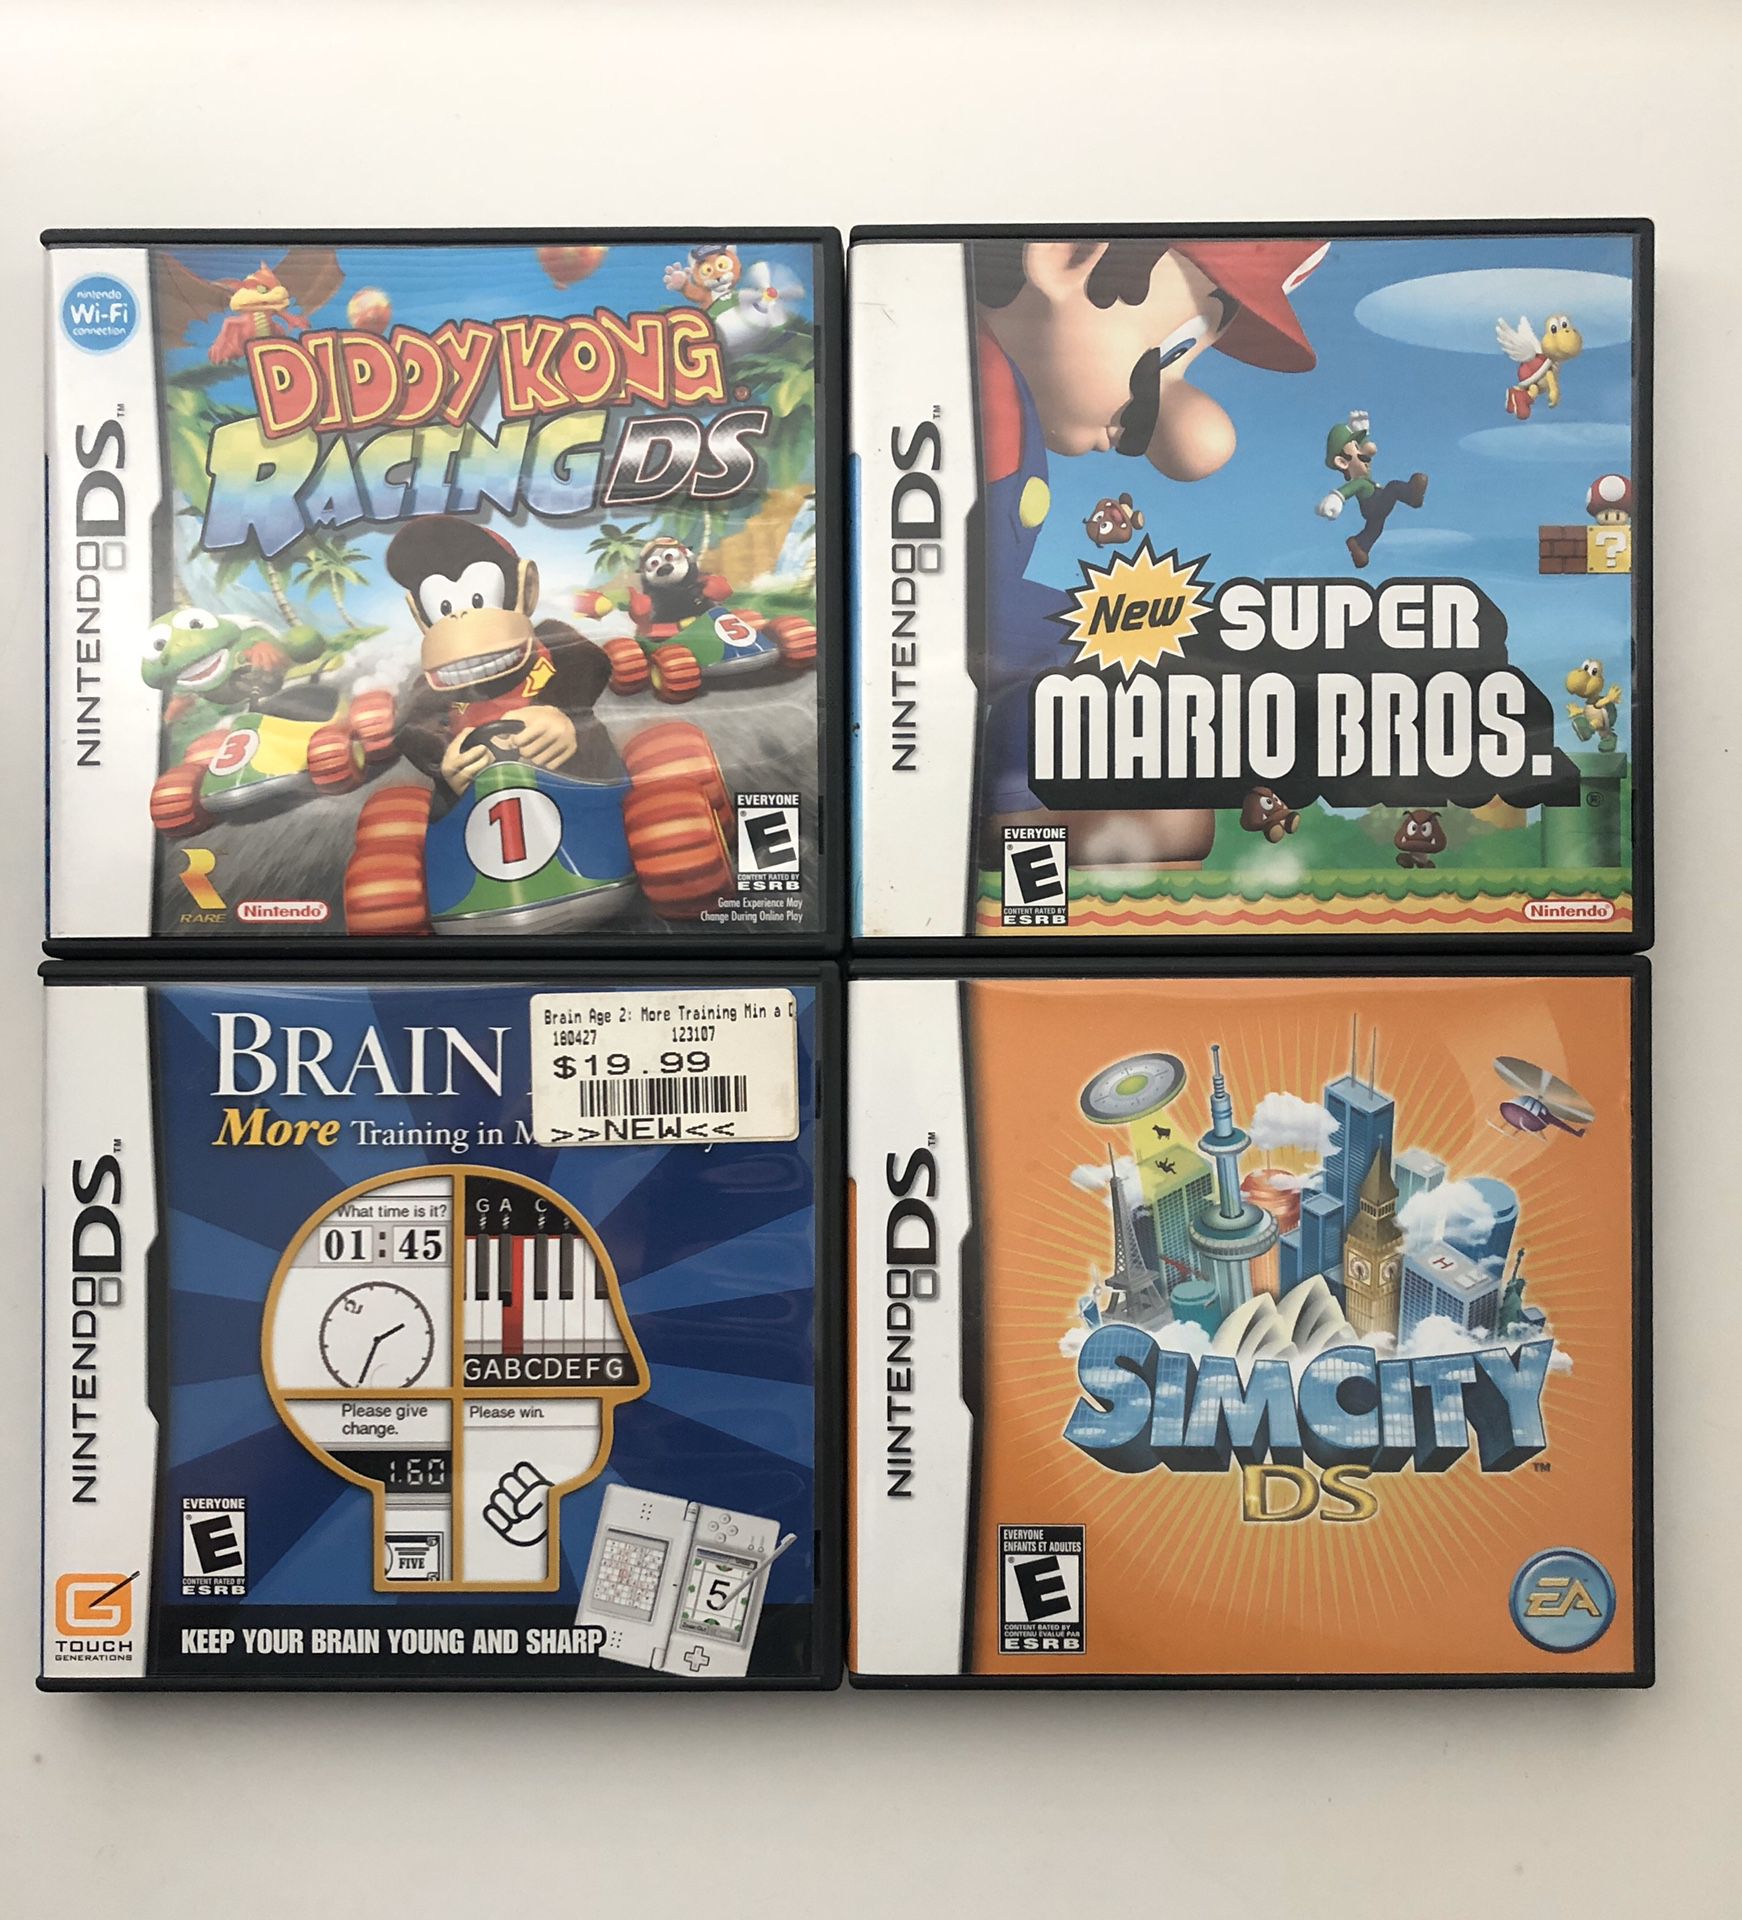 Nintendo DS games (e.g., Diddy Kong Racing & Super Mario Brothers)